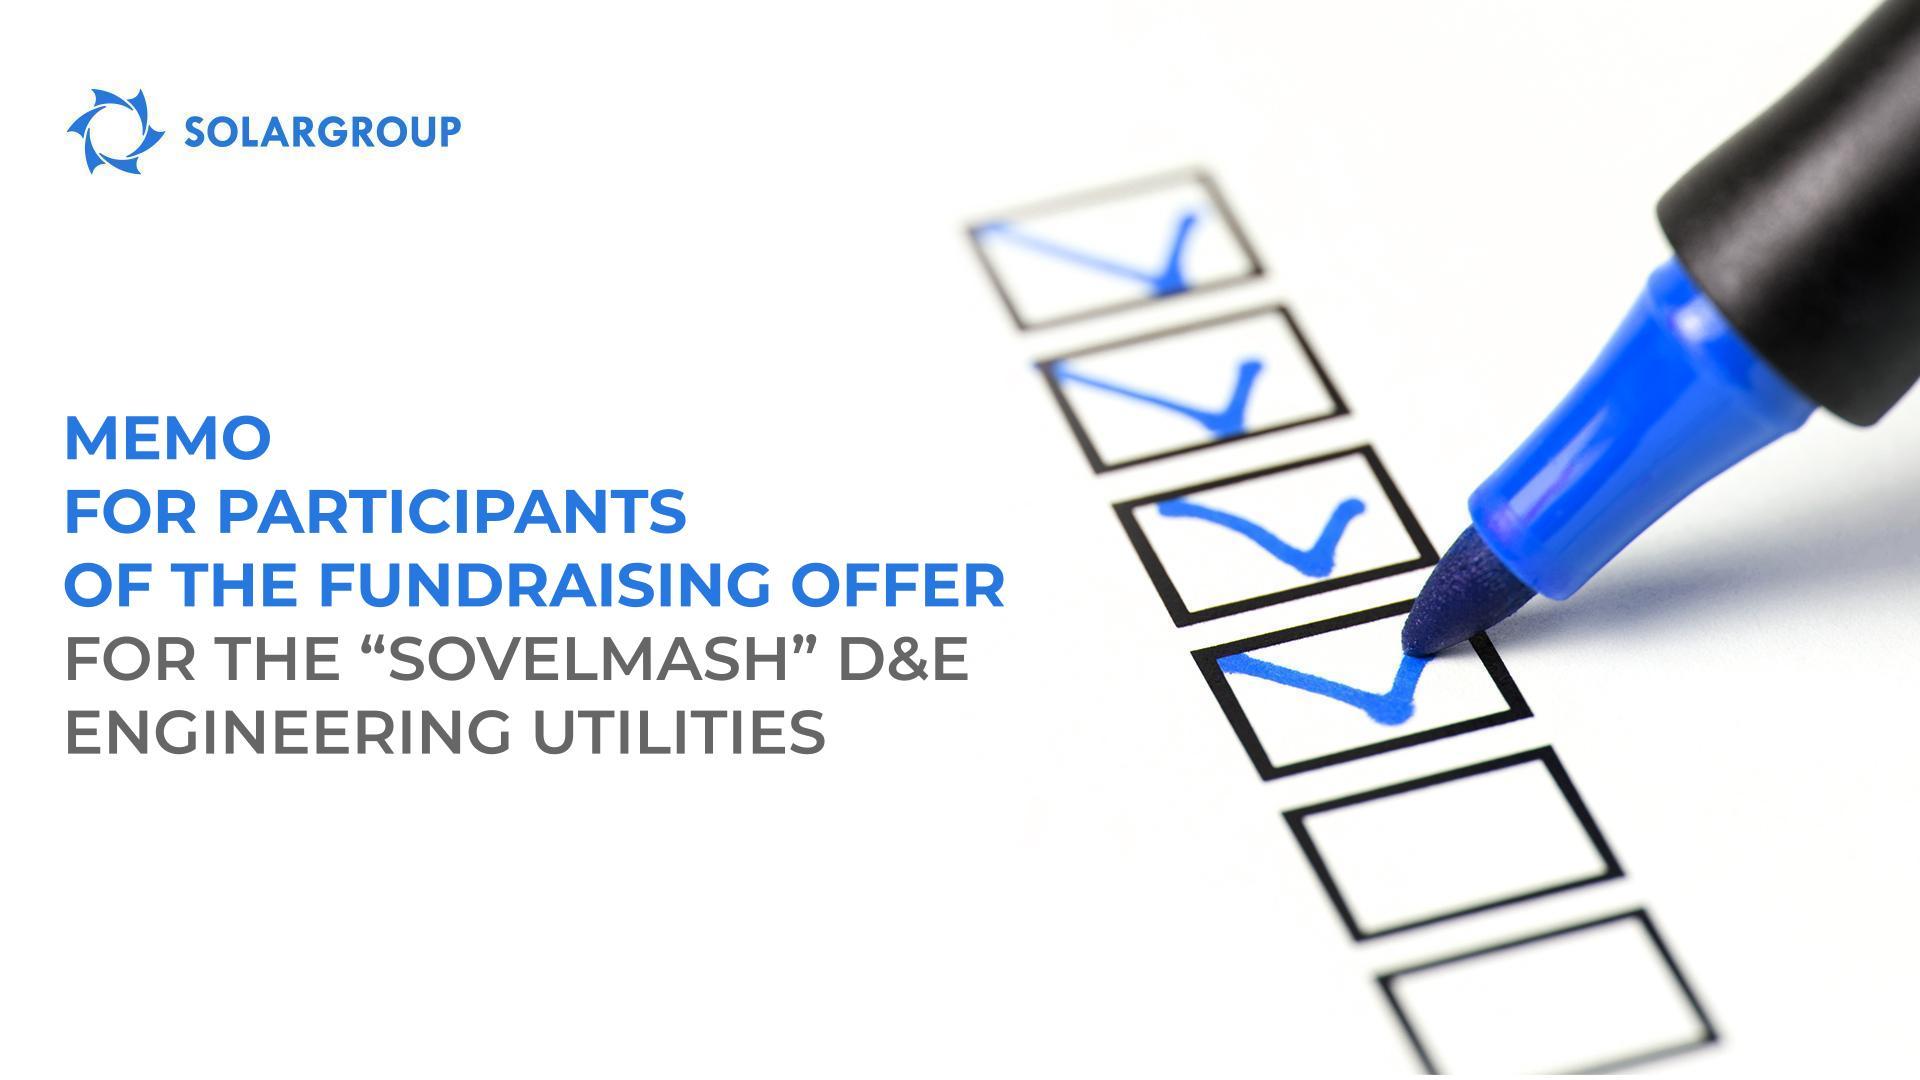 Memo for participants of the fundraising offer to support the "Sovelmash" D&E engineering utilities